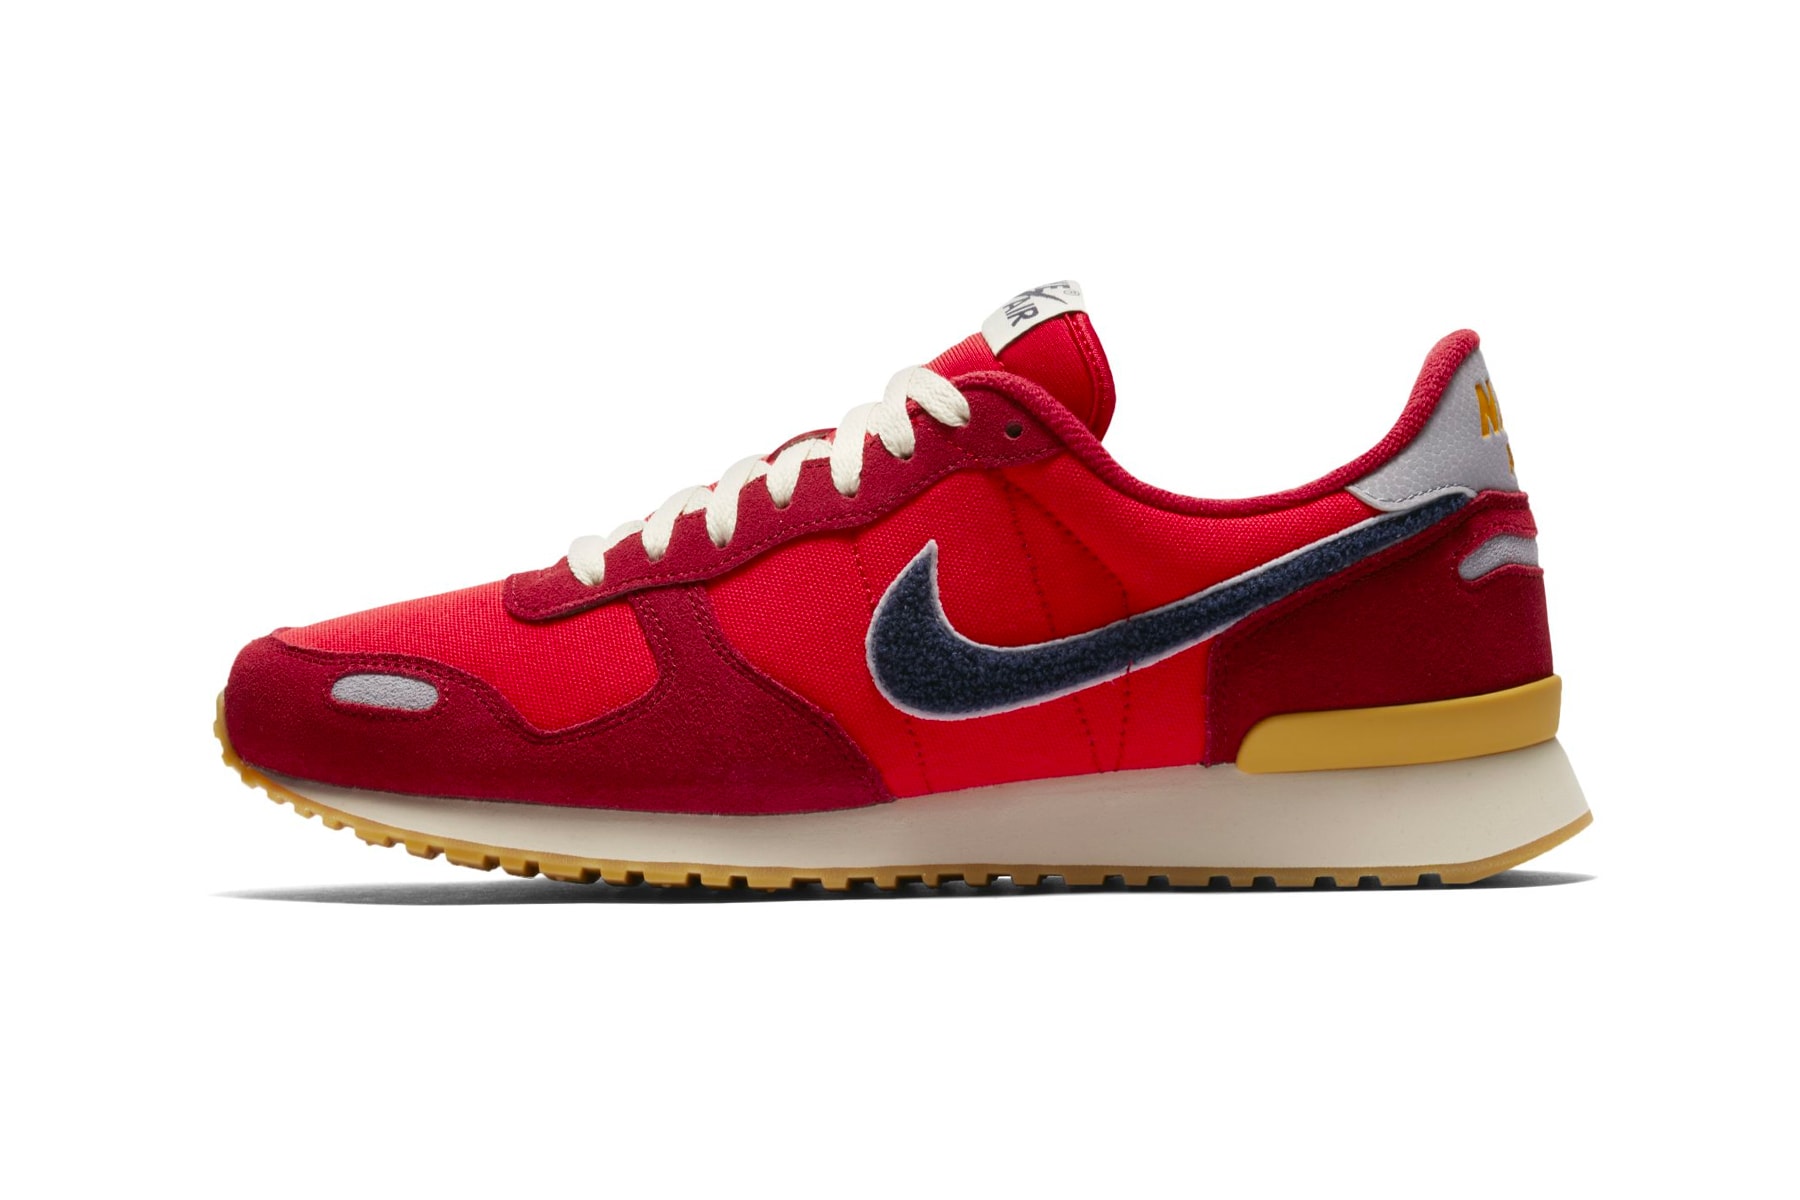 Nike Air Vortex Chenille Swoosh "University Red" blackened blue special edition sneakers 2018